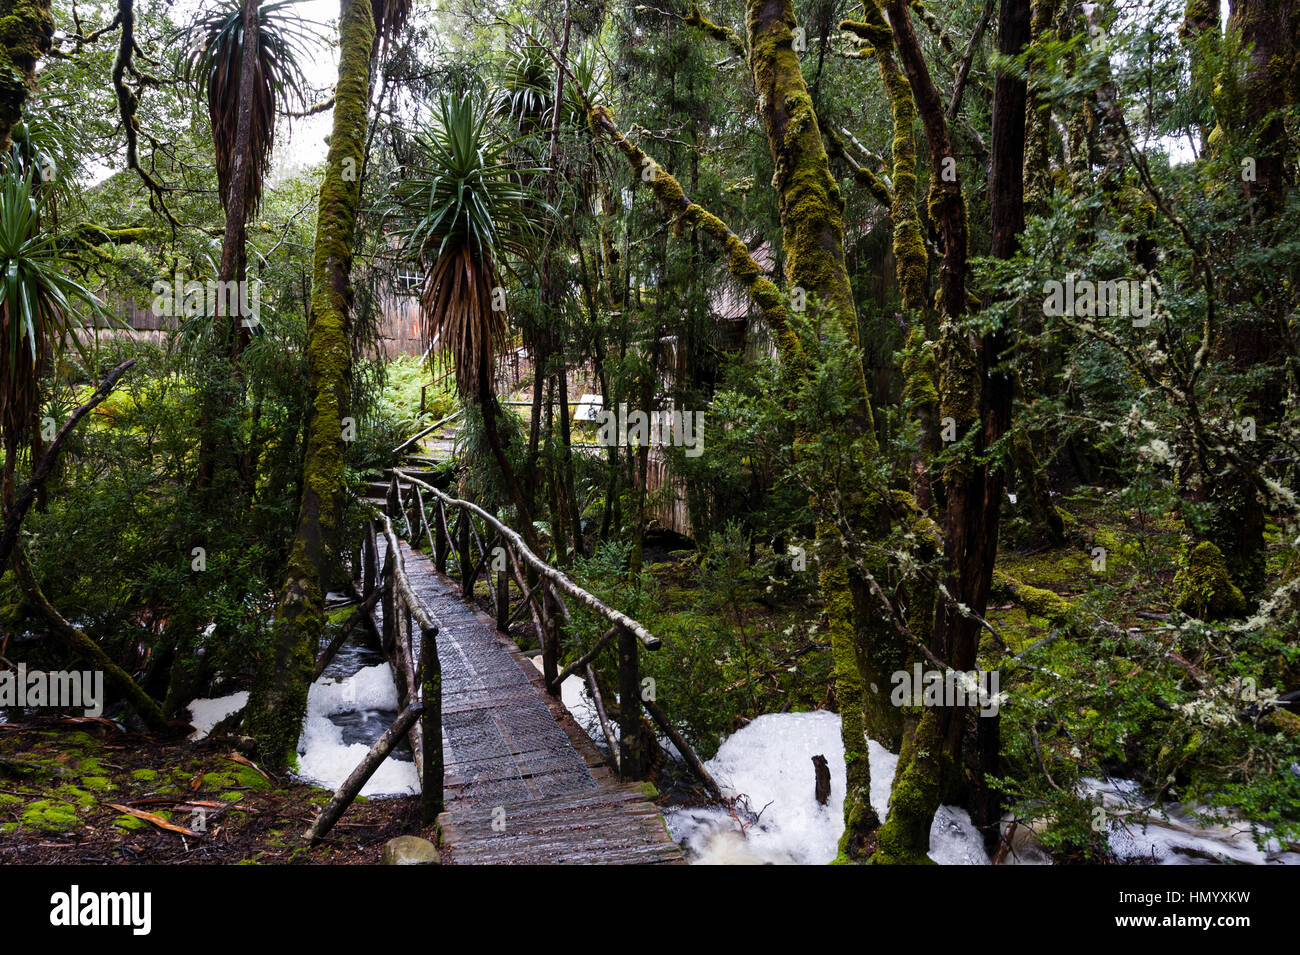 A timber footbridge crosses a swollen stream during a rainstorm in a cool temperate rainforest. Stock Photo